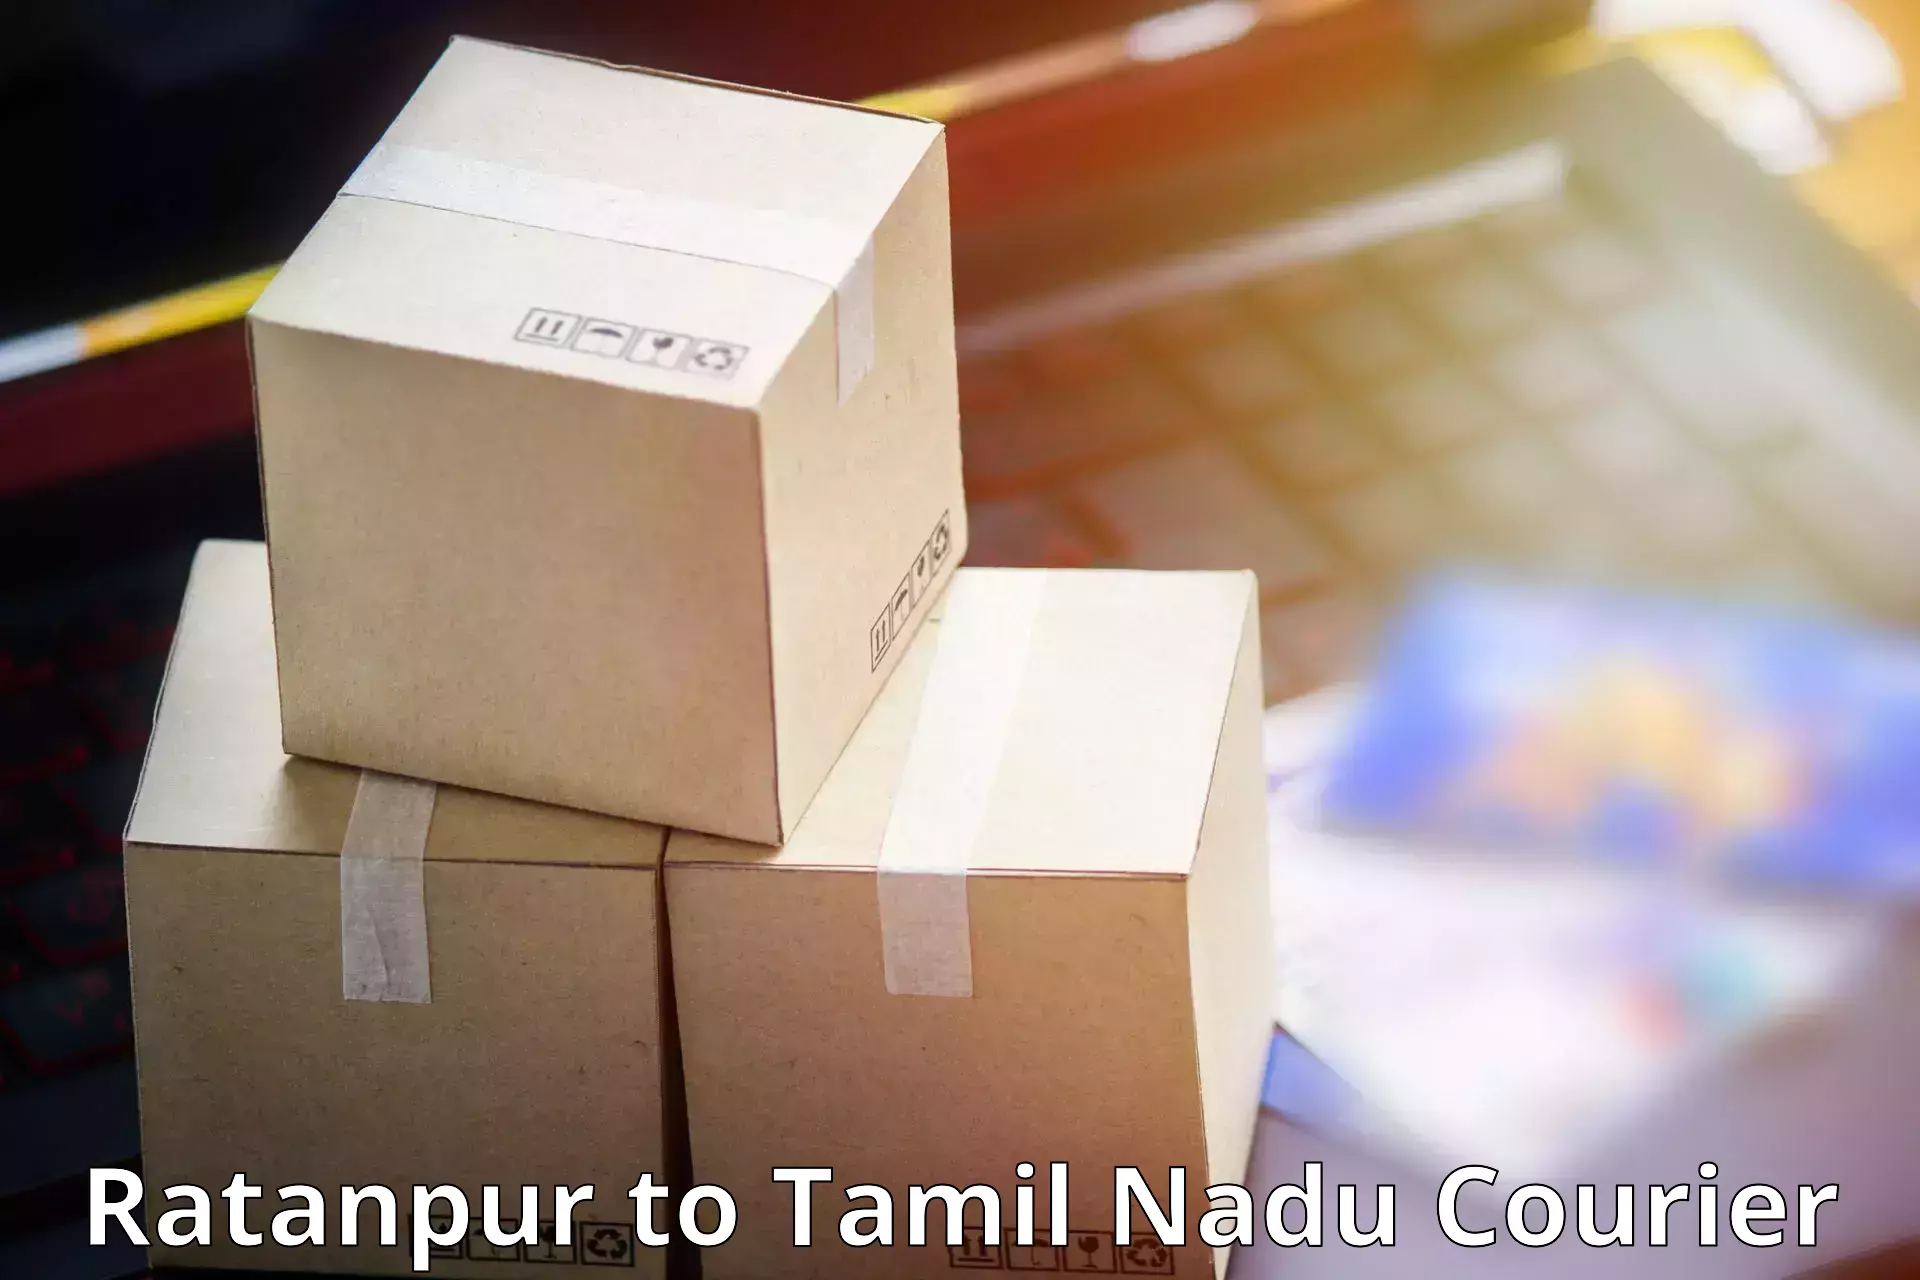 Small business couriers Ratanpur to Aruppukkottai